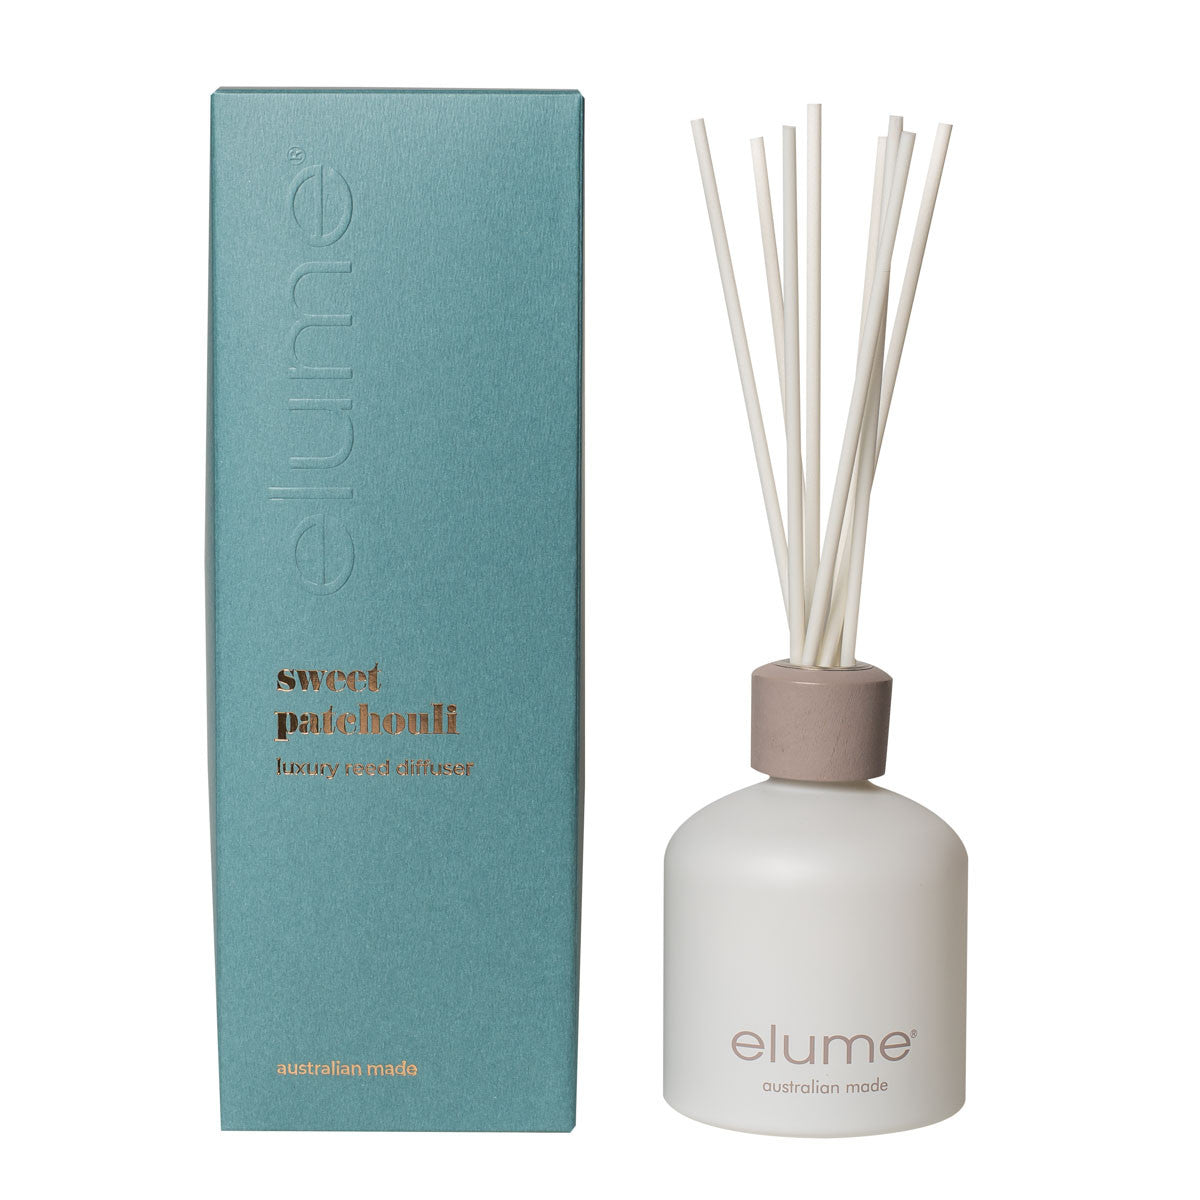 Sweet Patchouli Diffuser 200ml